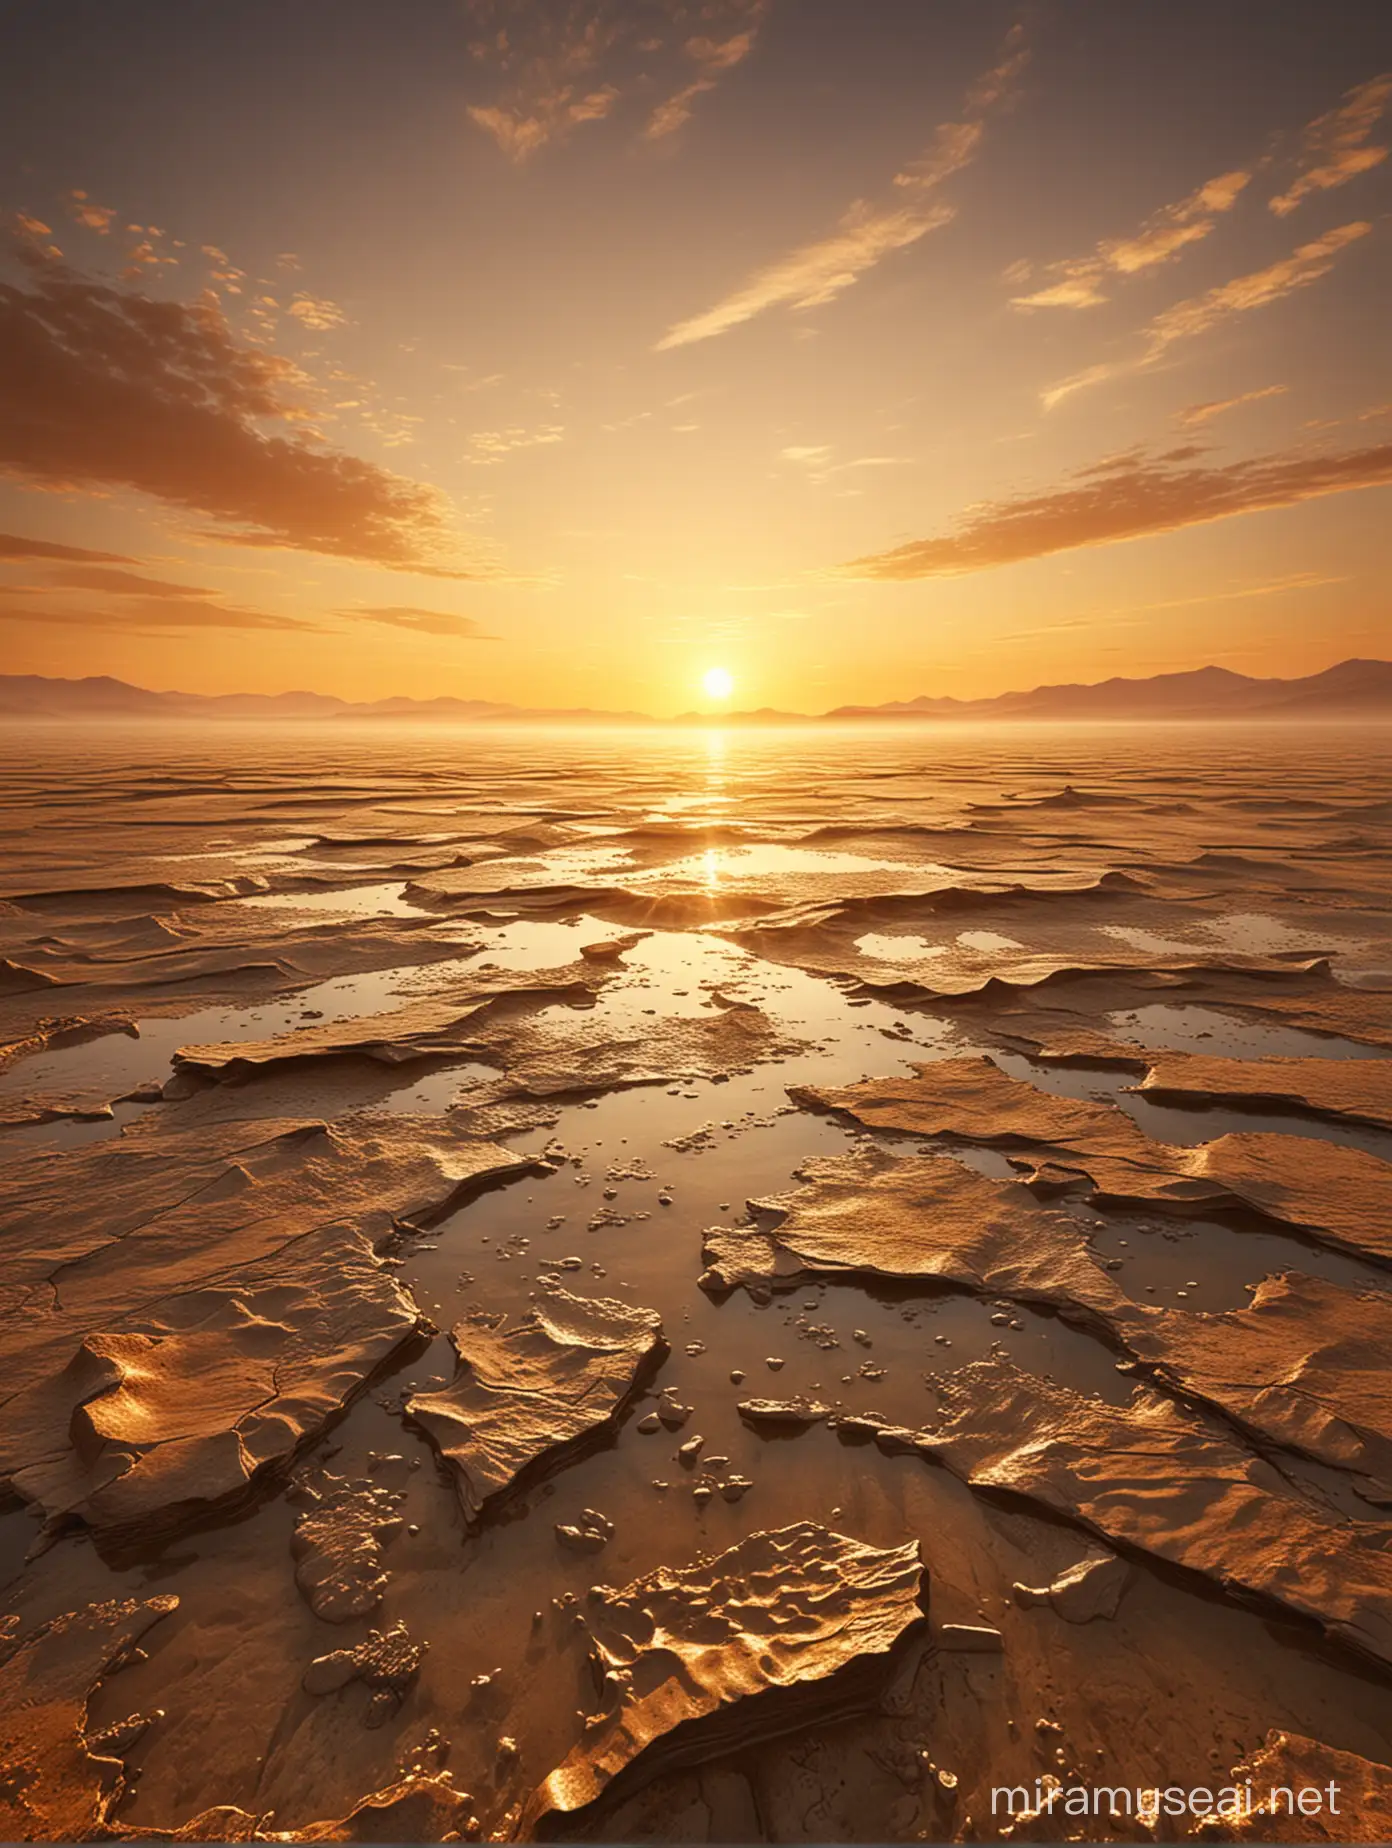 A serene image of a sunrise, casting golden hues over a vast, untouched landscape, symbolizing potential and wealth beneath the surface